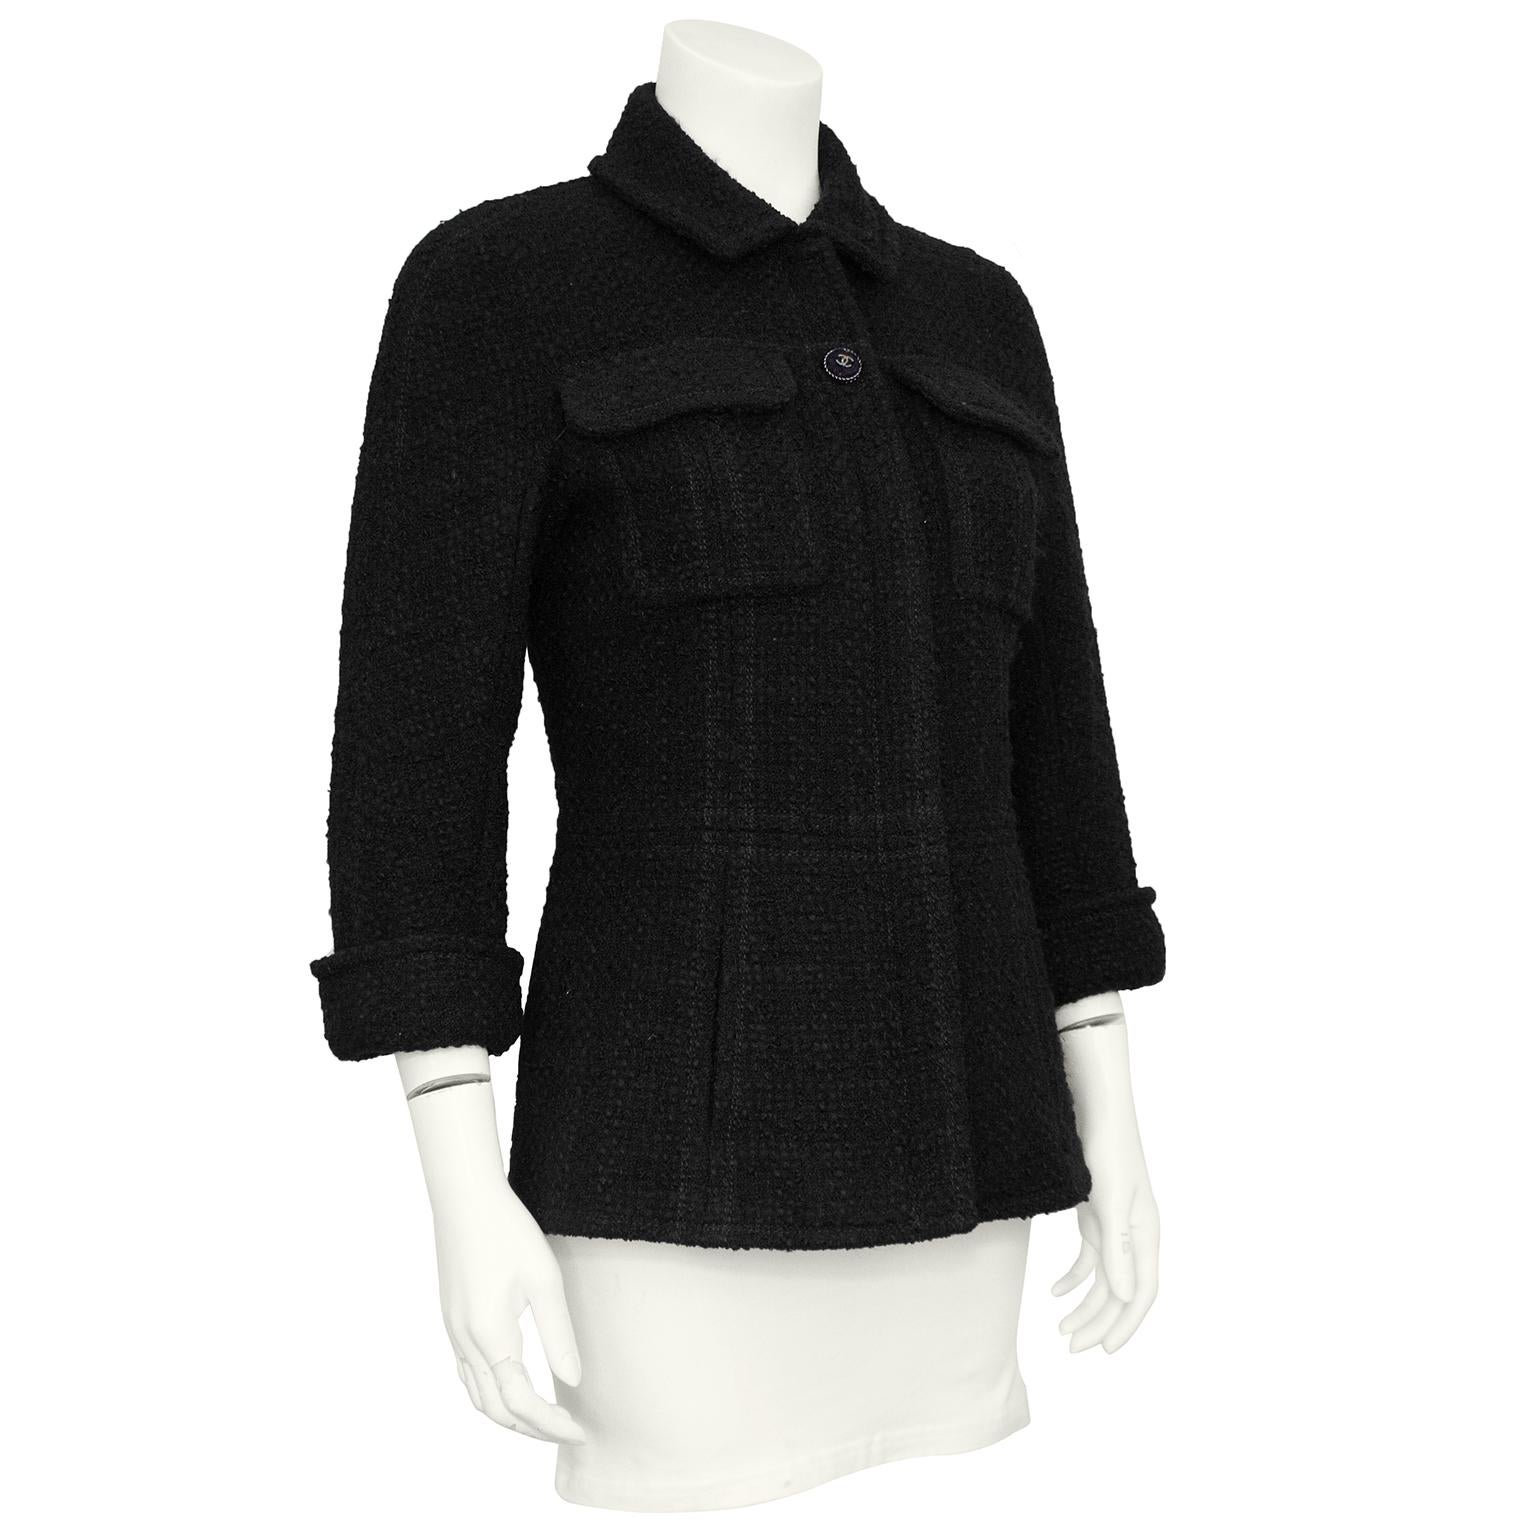 Beautiful and timeless Chanel jacket. Black boucle with patch pockets at the bust, vertical slit pockets at hips and bracelet length rolled sleeves. Buttons at cuffs and top centre button are dark silver with matching black boucle. The rest buttons